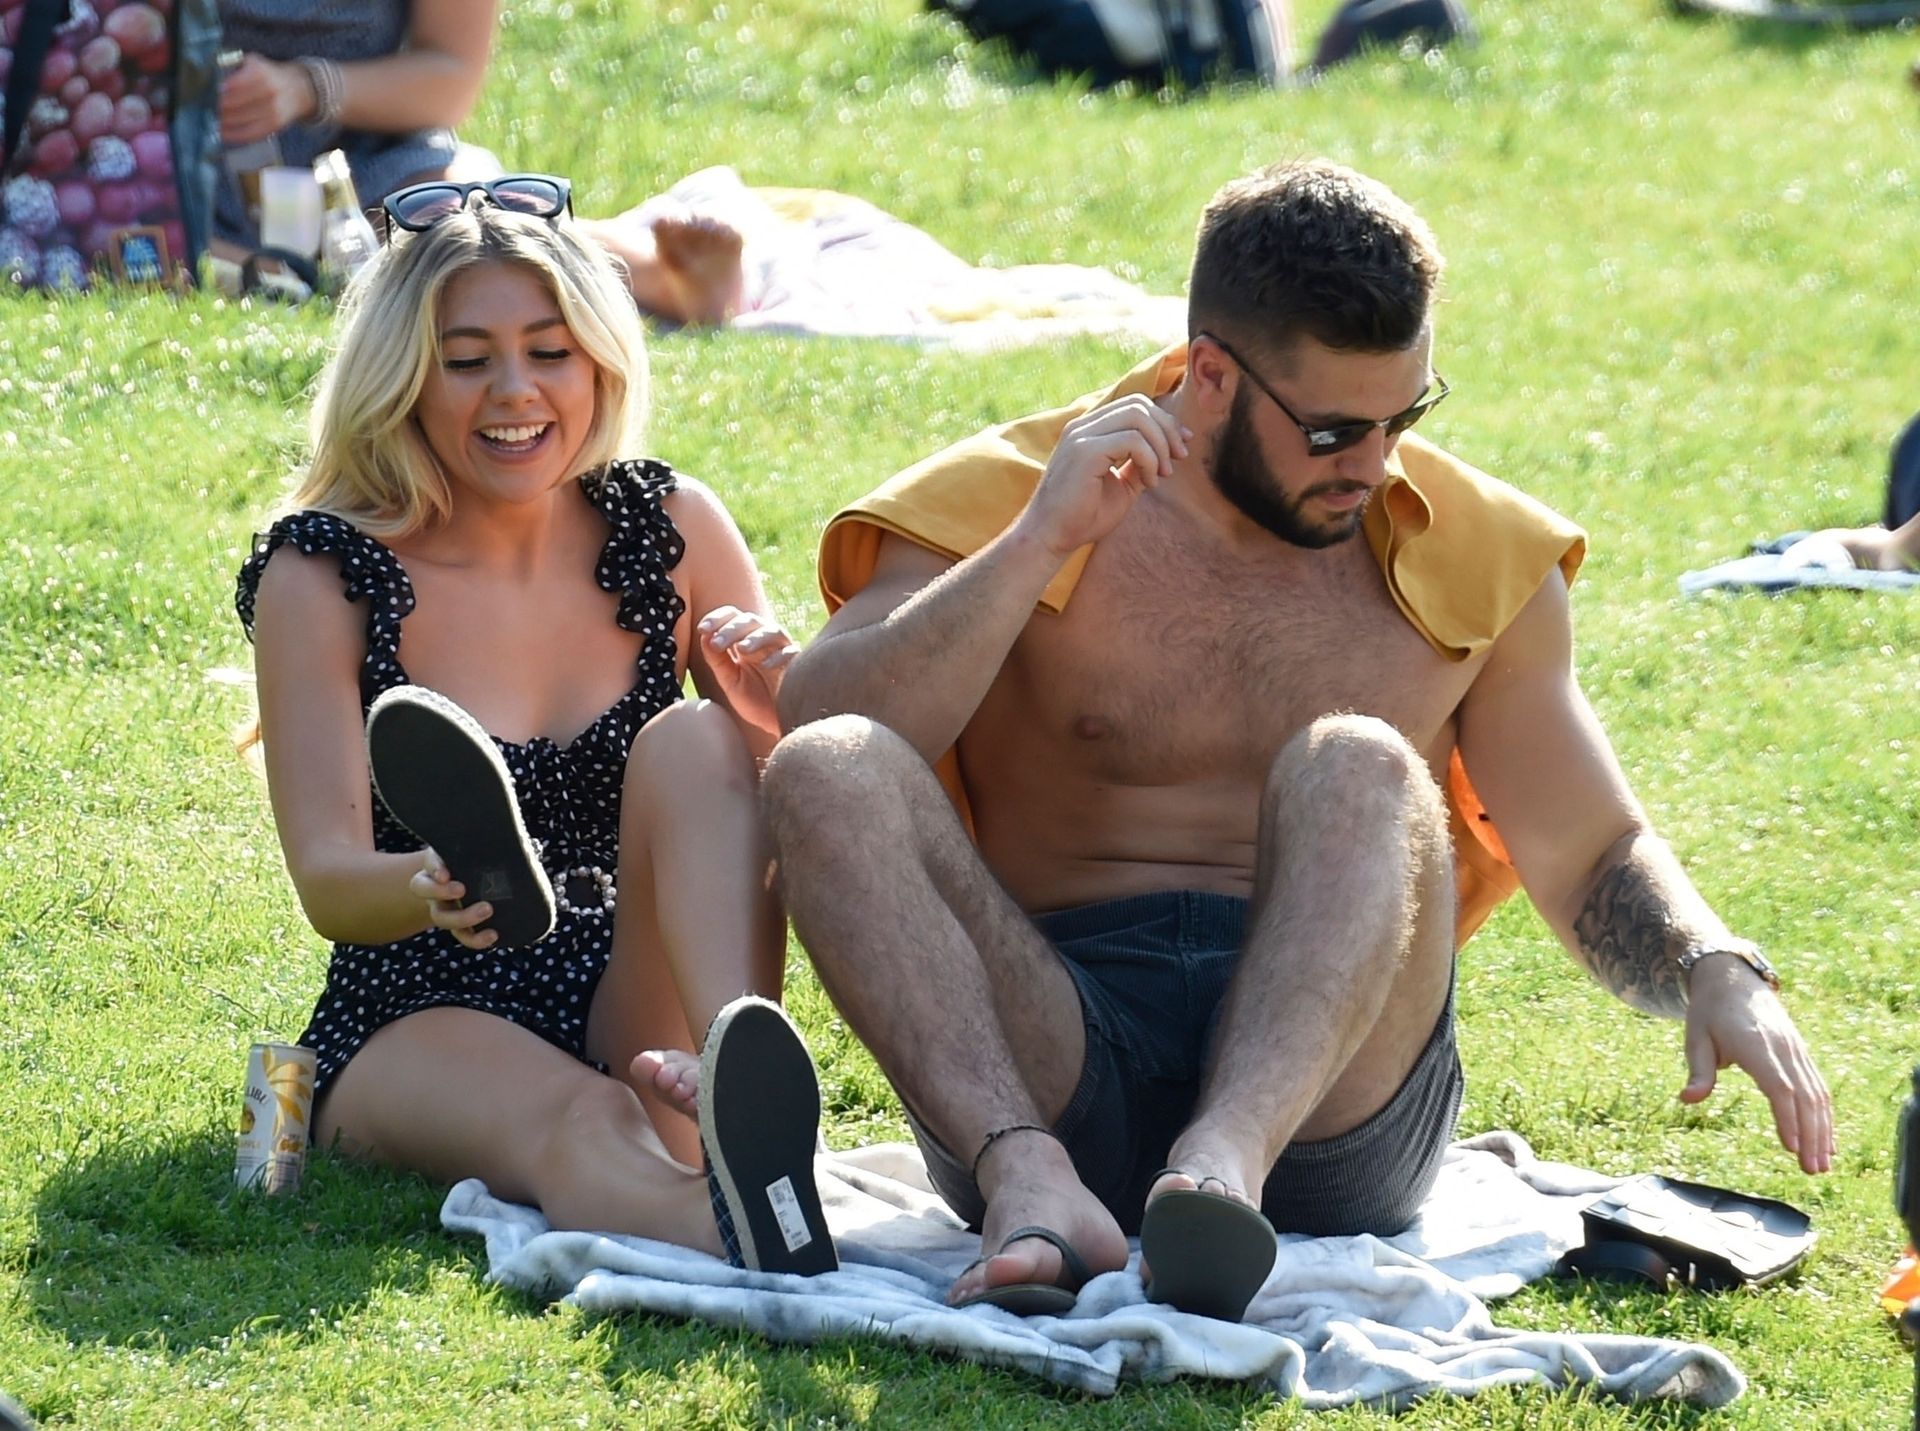 Sexy Paige Turley & Finn Tapp Pack on the PDA on a Picnic in Manchester (83 Photos)